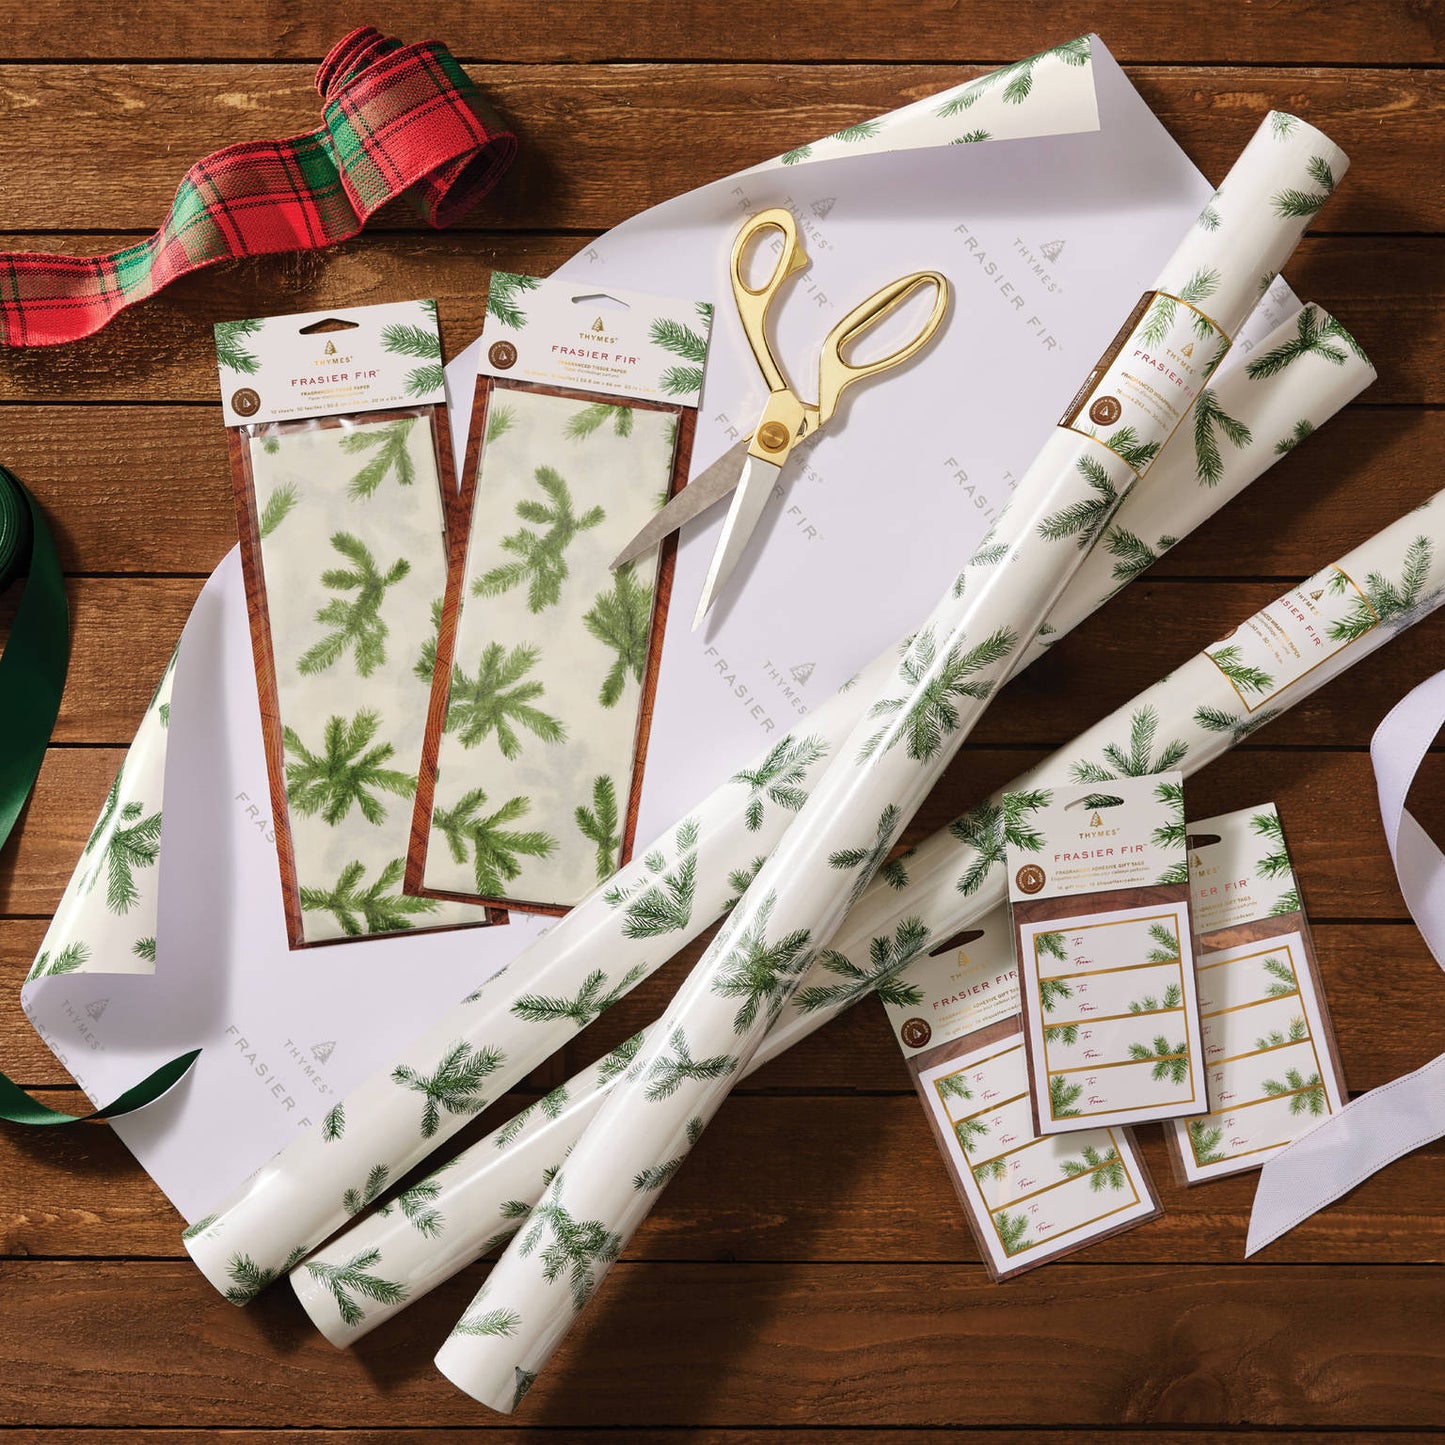 Thymes Scented Wrapping Paper | Frasier Fir | Pine Needle Design